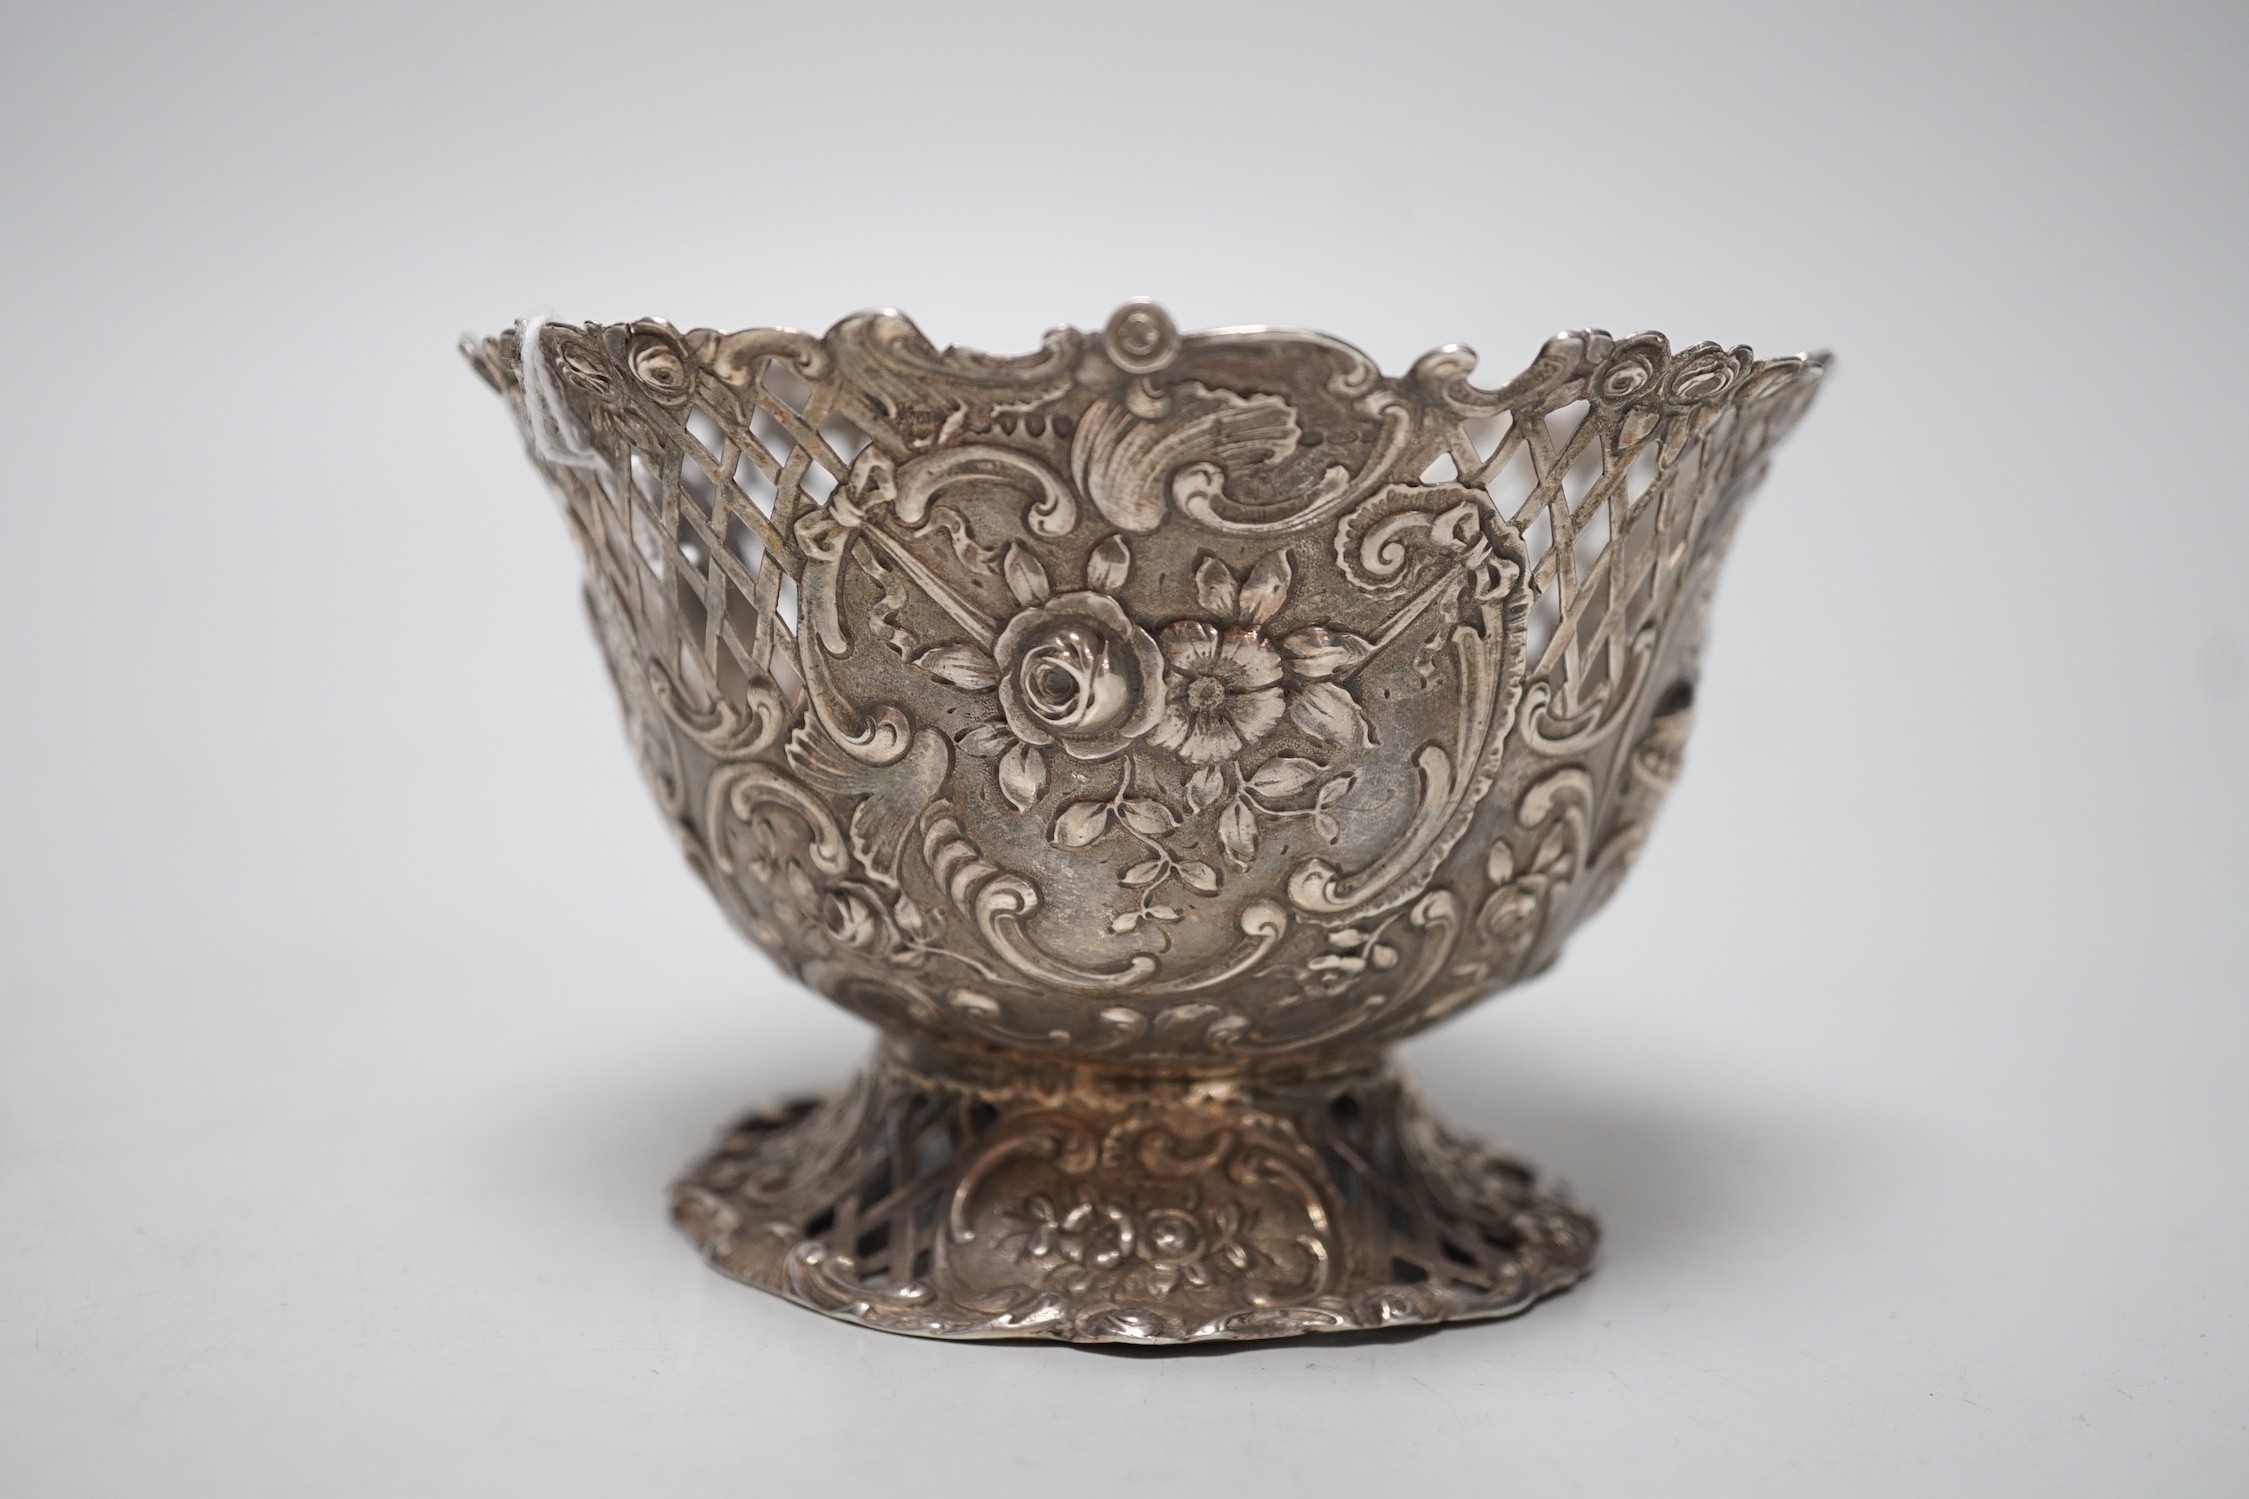 A late 19th century French pierced embossed silver bowl, on circular foot, import marks for William Moreing, London, 1894, diameter 12.2cm, 5.8oz.